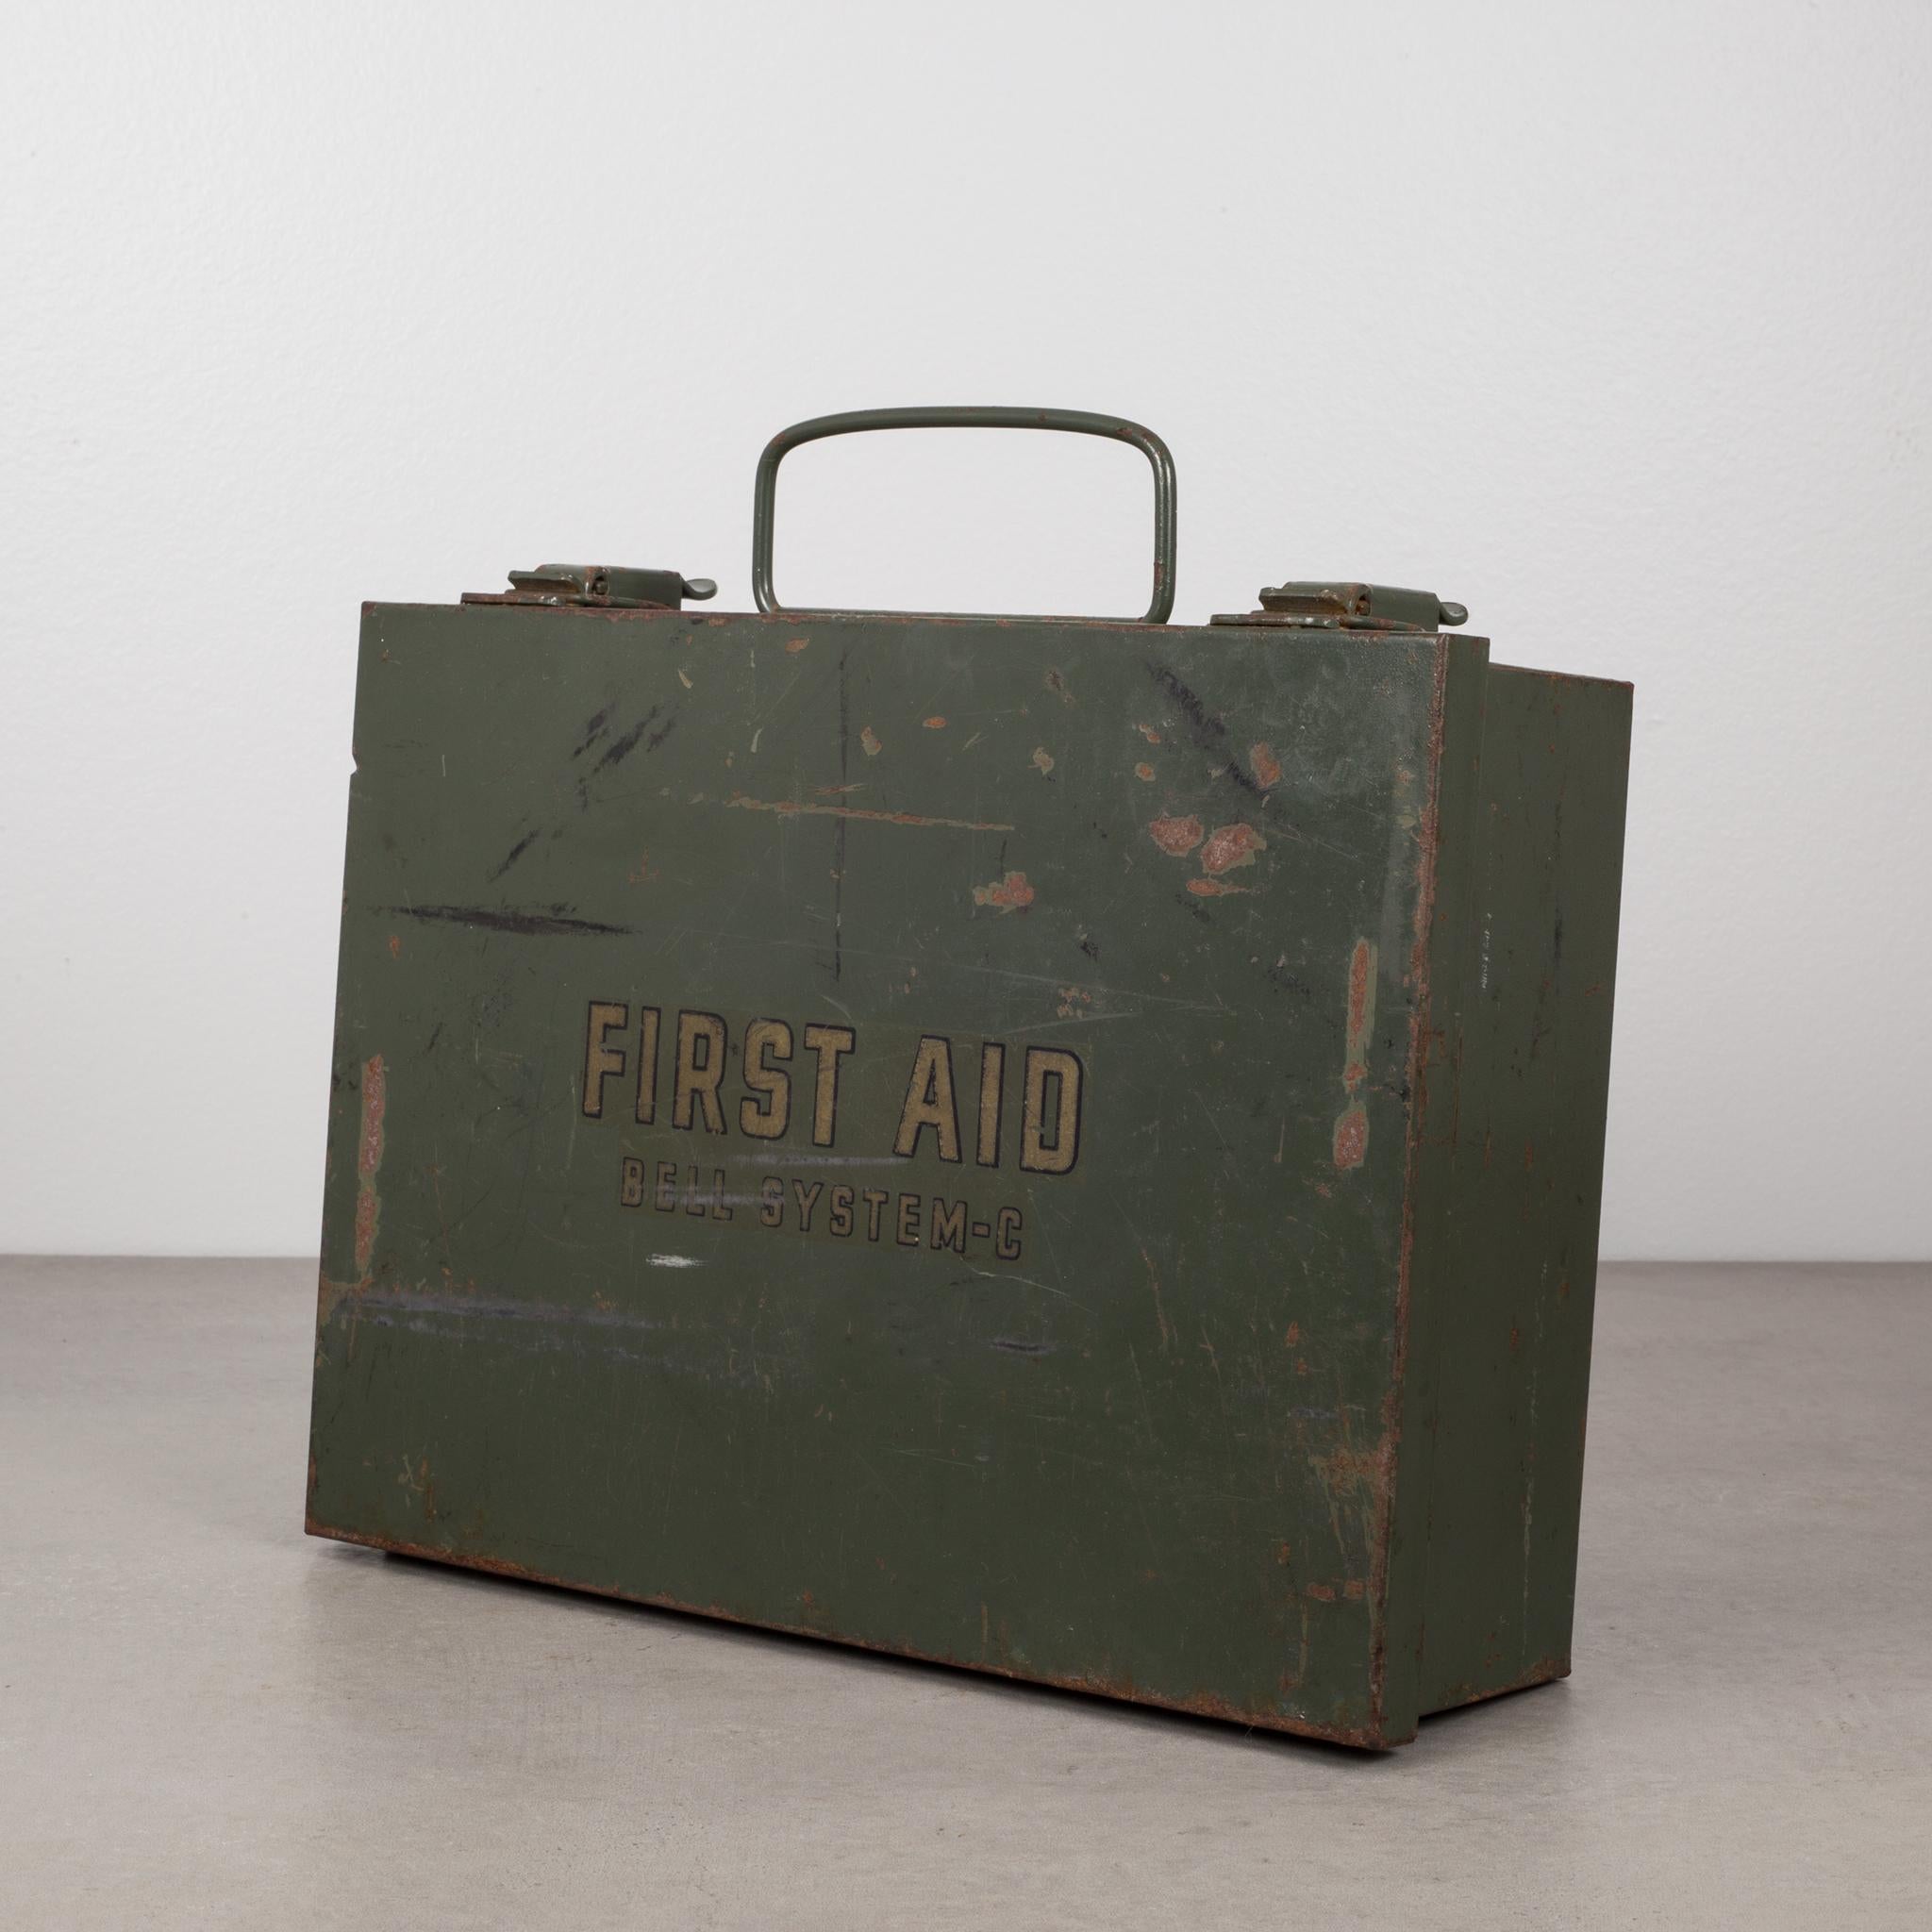 This is an original vintage metal first aid kit. The box is filled with medical items in their original boxes including bandage, Iodine, petroleum jelly, burn cream and a pair of scissors still in their wrapper. The original finish has the